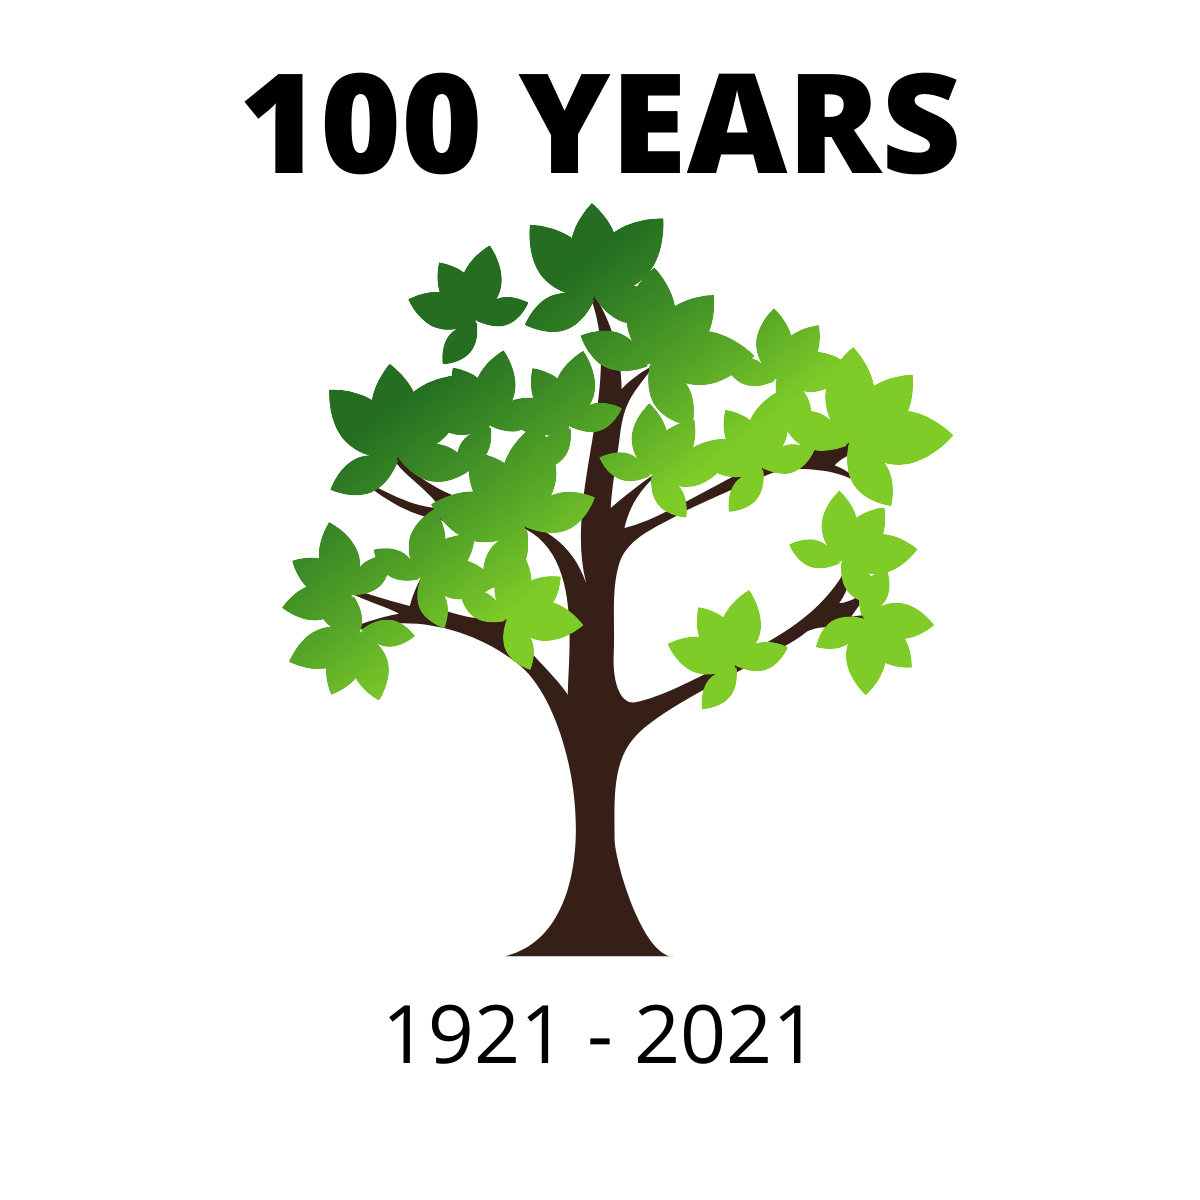 infographic of a tree marking 1921 - 2021